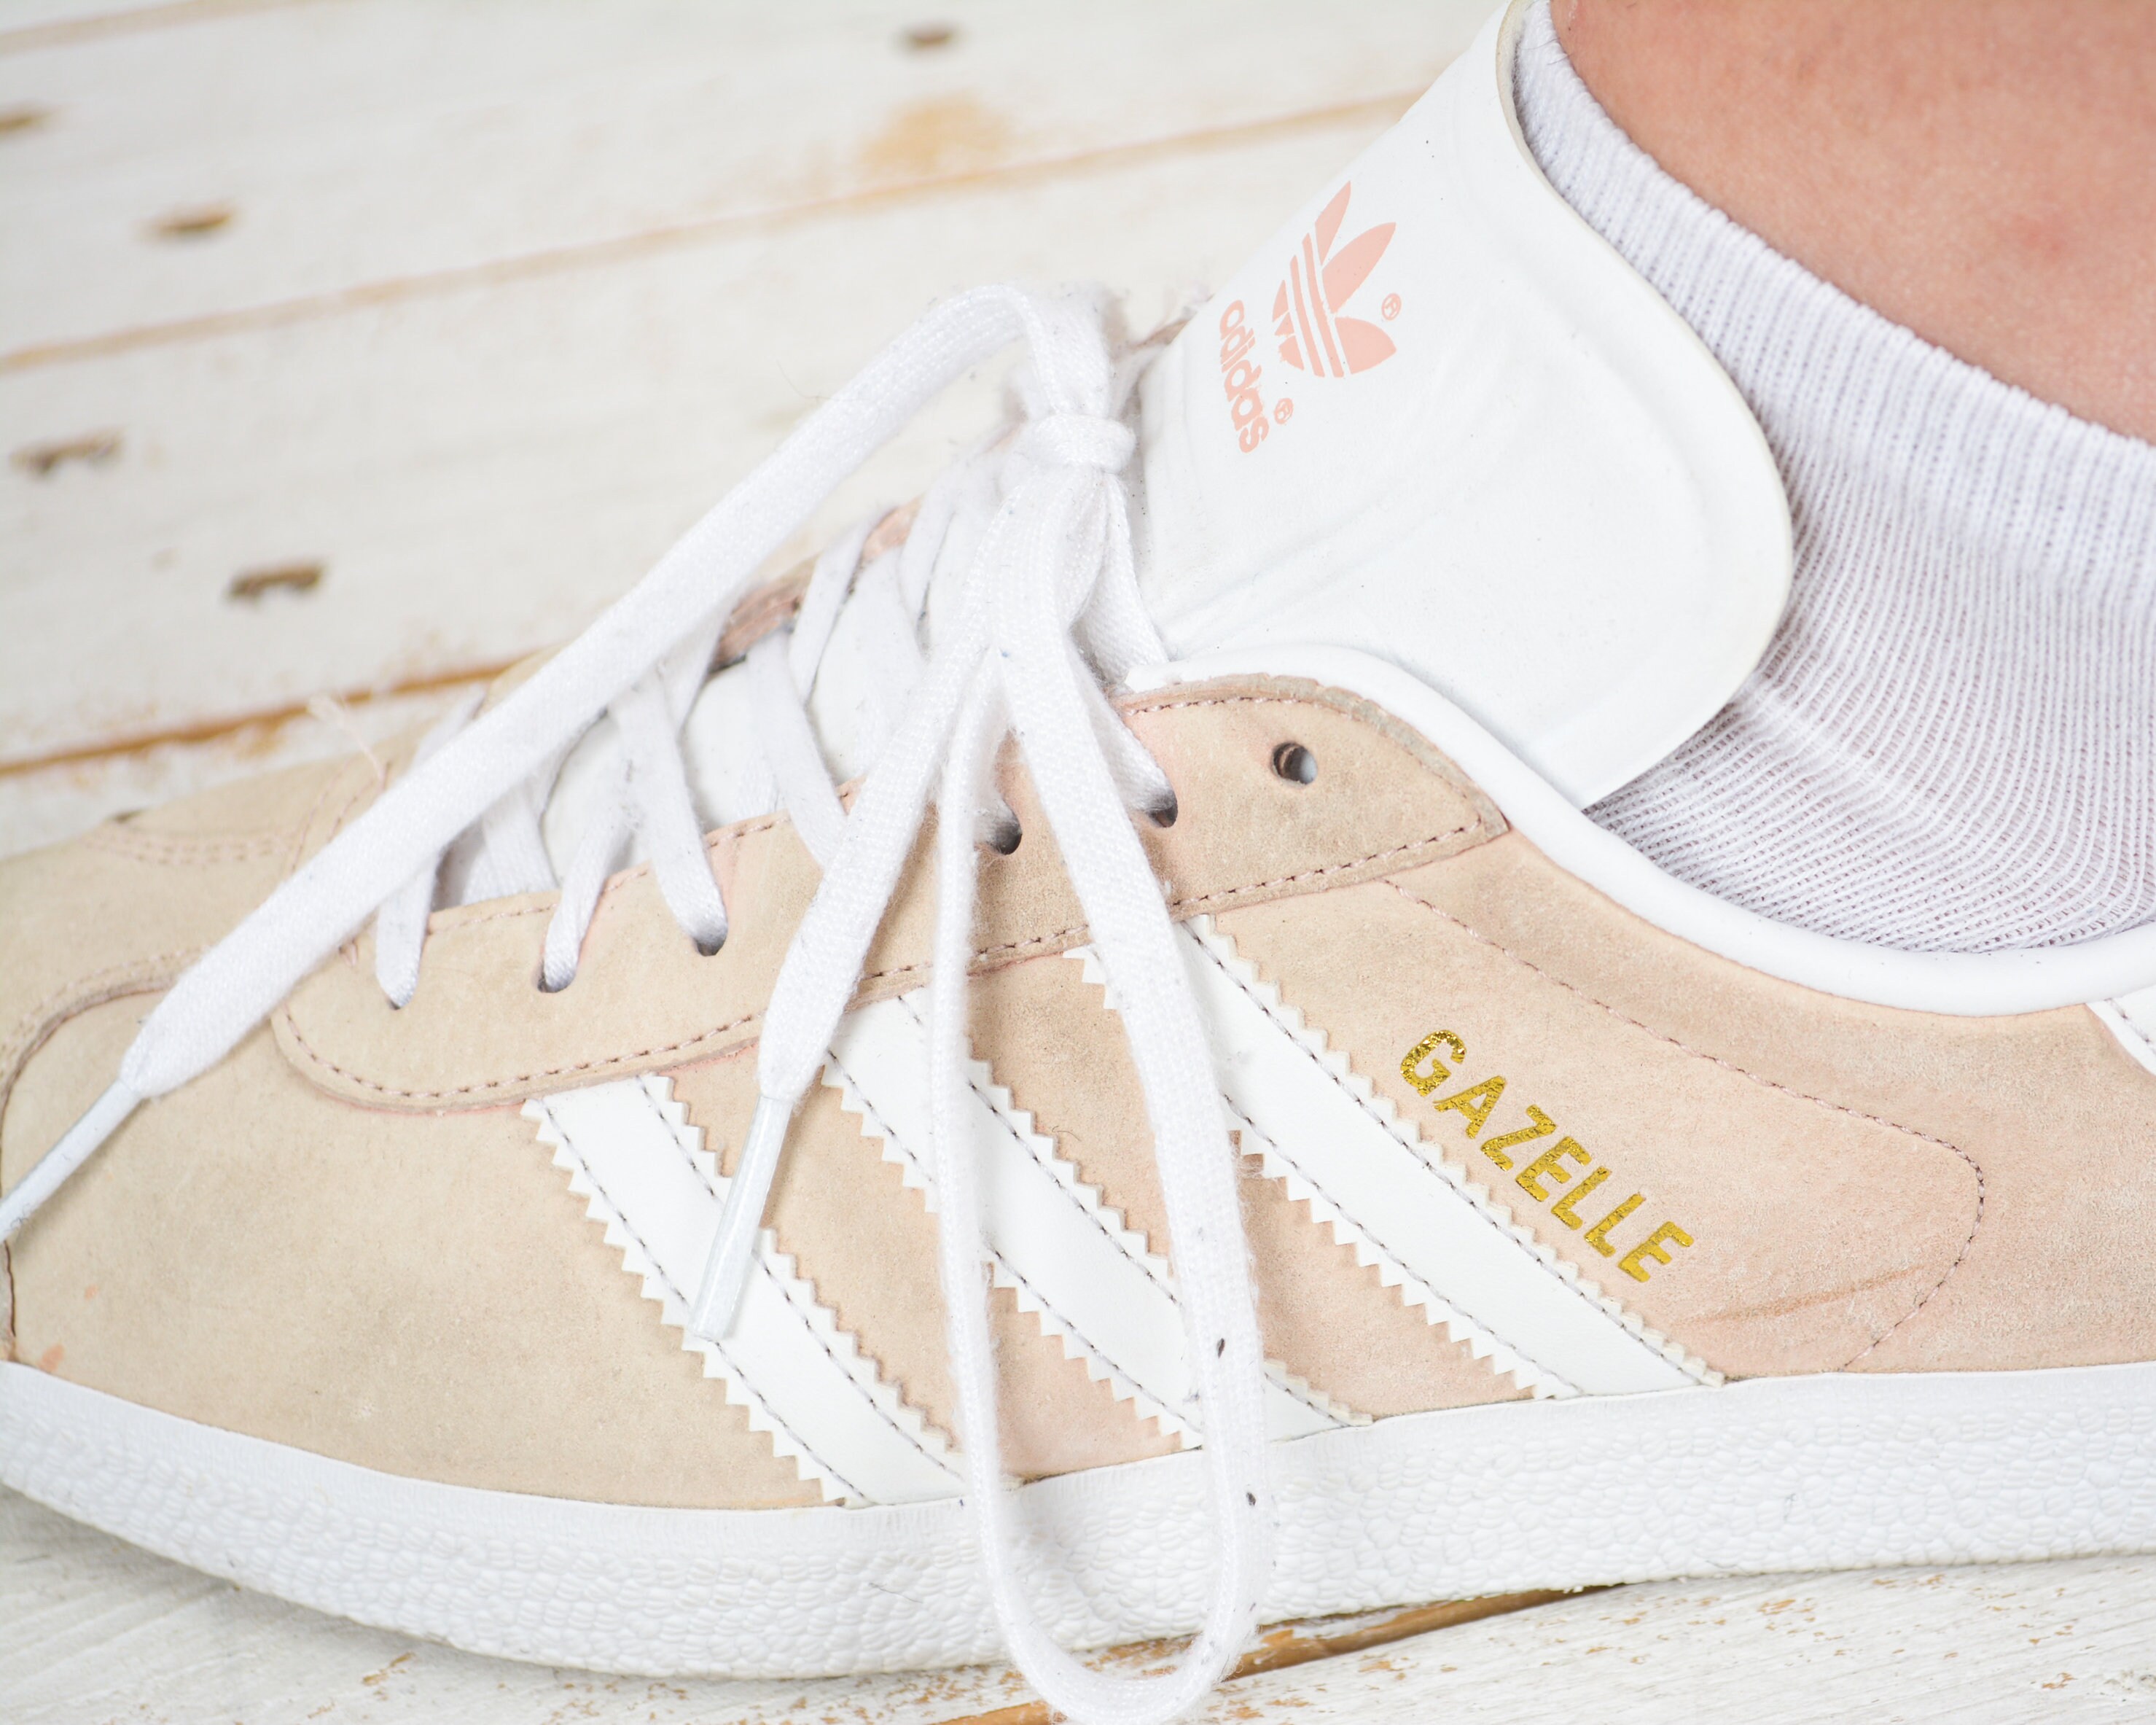 Suede Adidas Shoes - Etsy